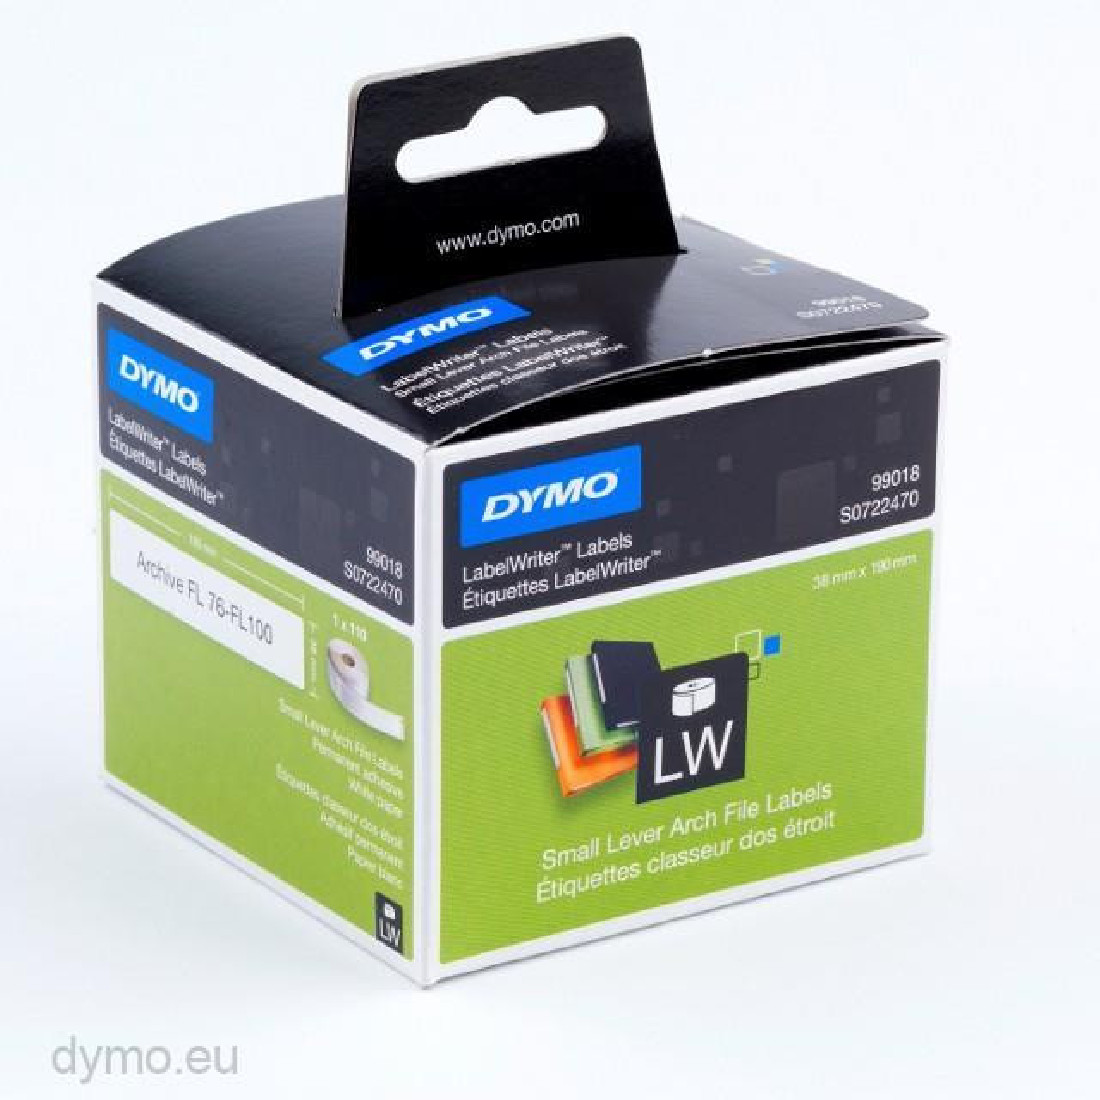 DYMO 99018 LW LEVER ARCHIVE FILE LABELS SMALL 19,0x3,8cm S0722470